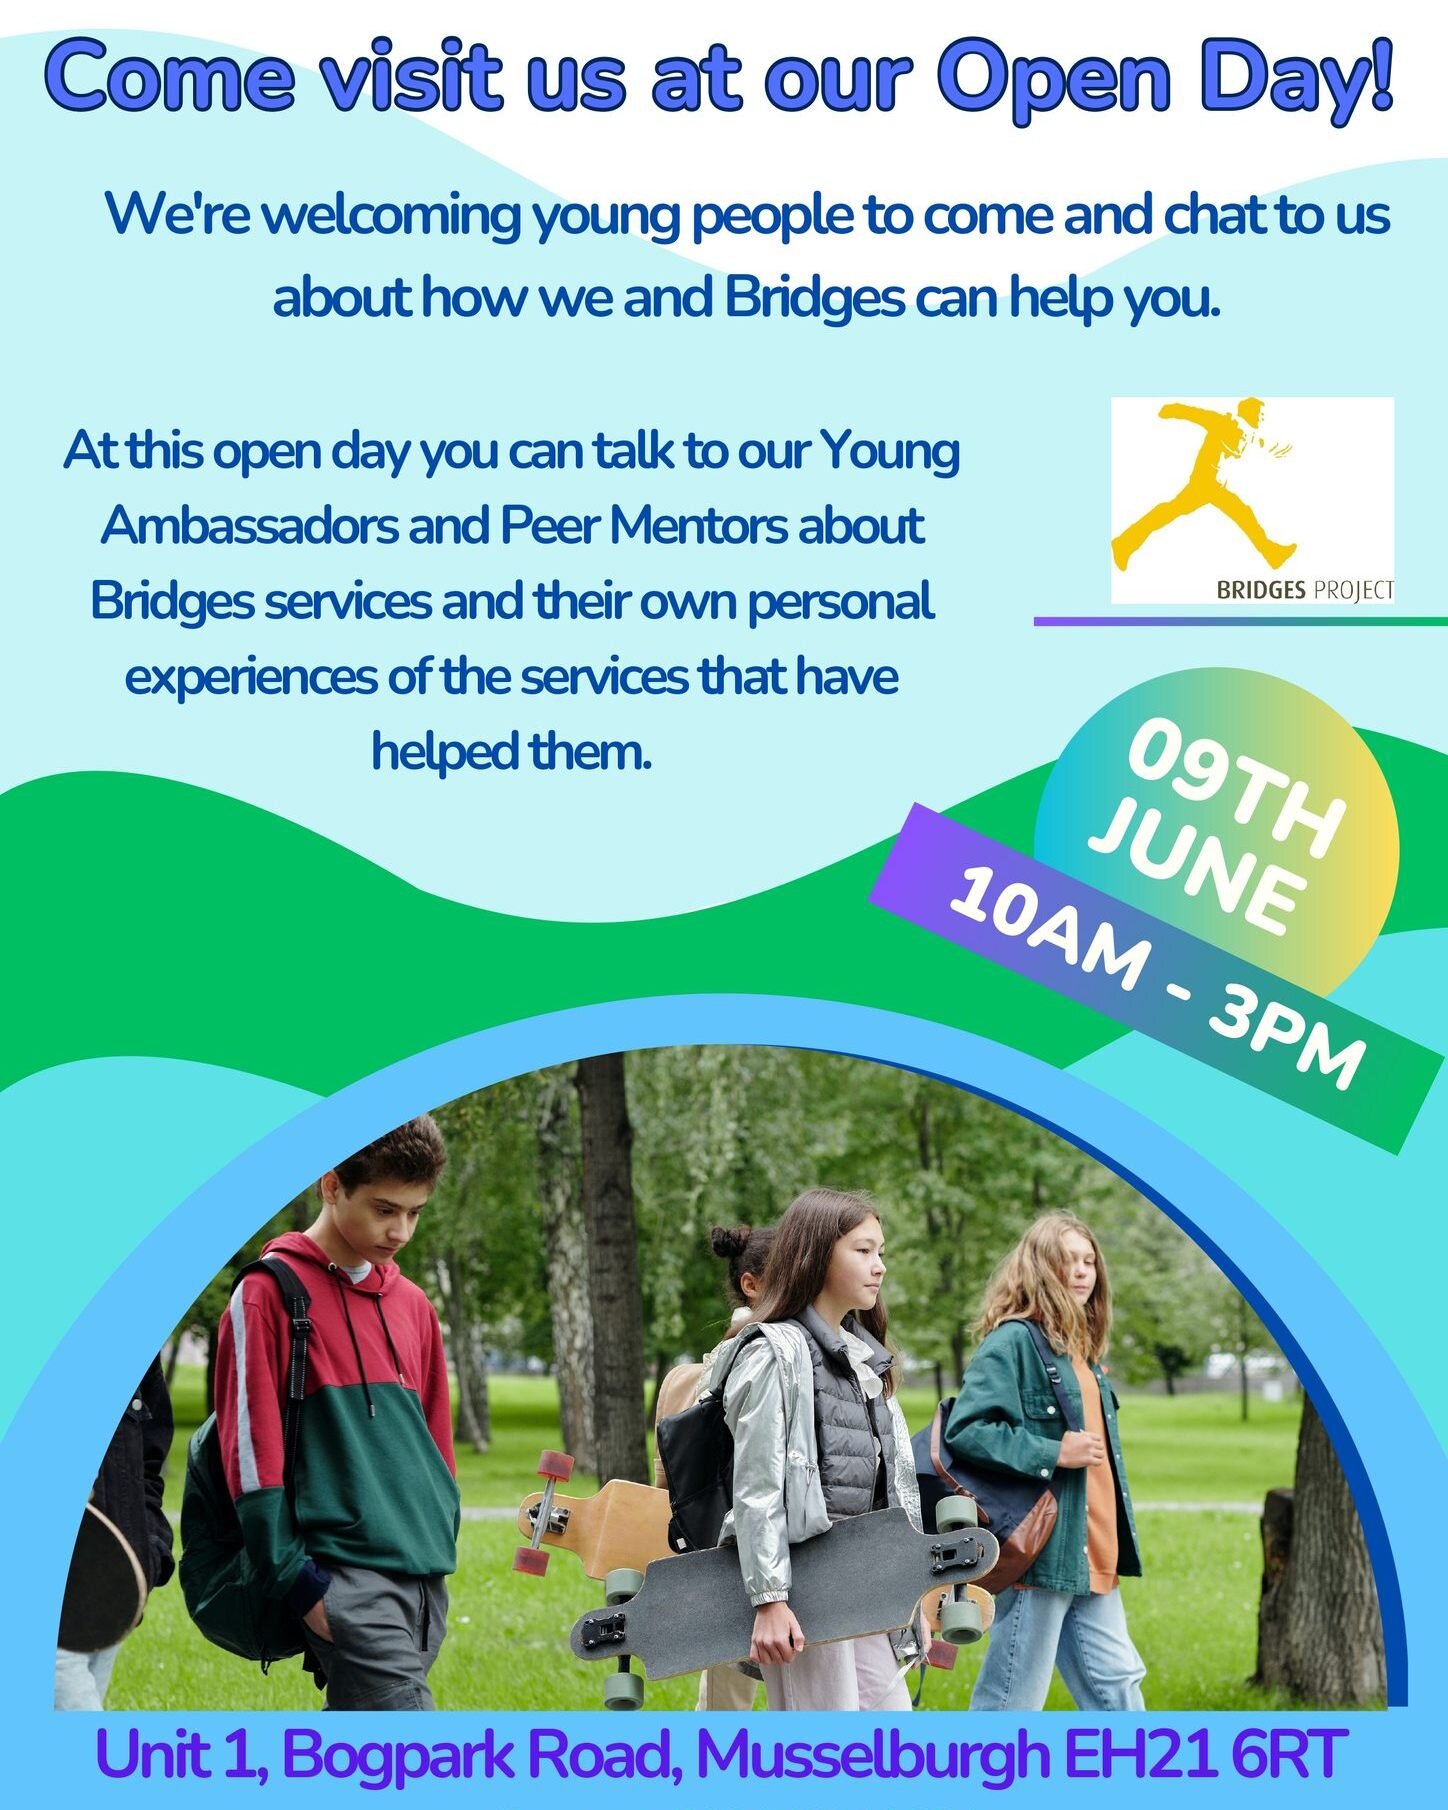 Come along to our Open Day for young people! 

✅Led by our Young Ambassadors and Peer Mentors
📅 9 June
🕙 10am-3pm
📍At Bridges Project

#AllWelcome #YouthLed #PeerLed #OpenDay #ComeAlong #DropIn #DropBy #YoungAmbassadors #PowerOfYouth #ListeningPee